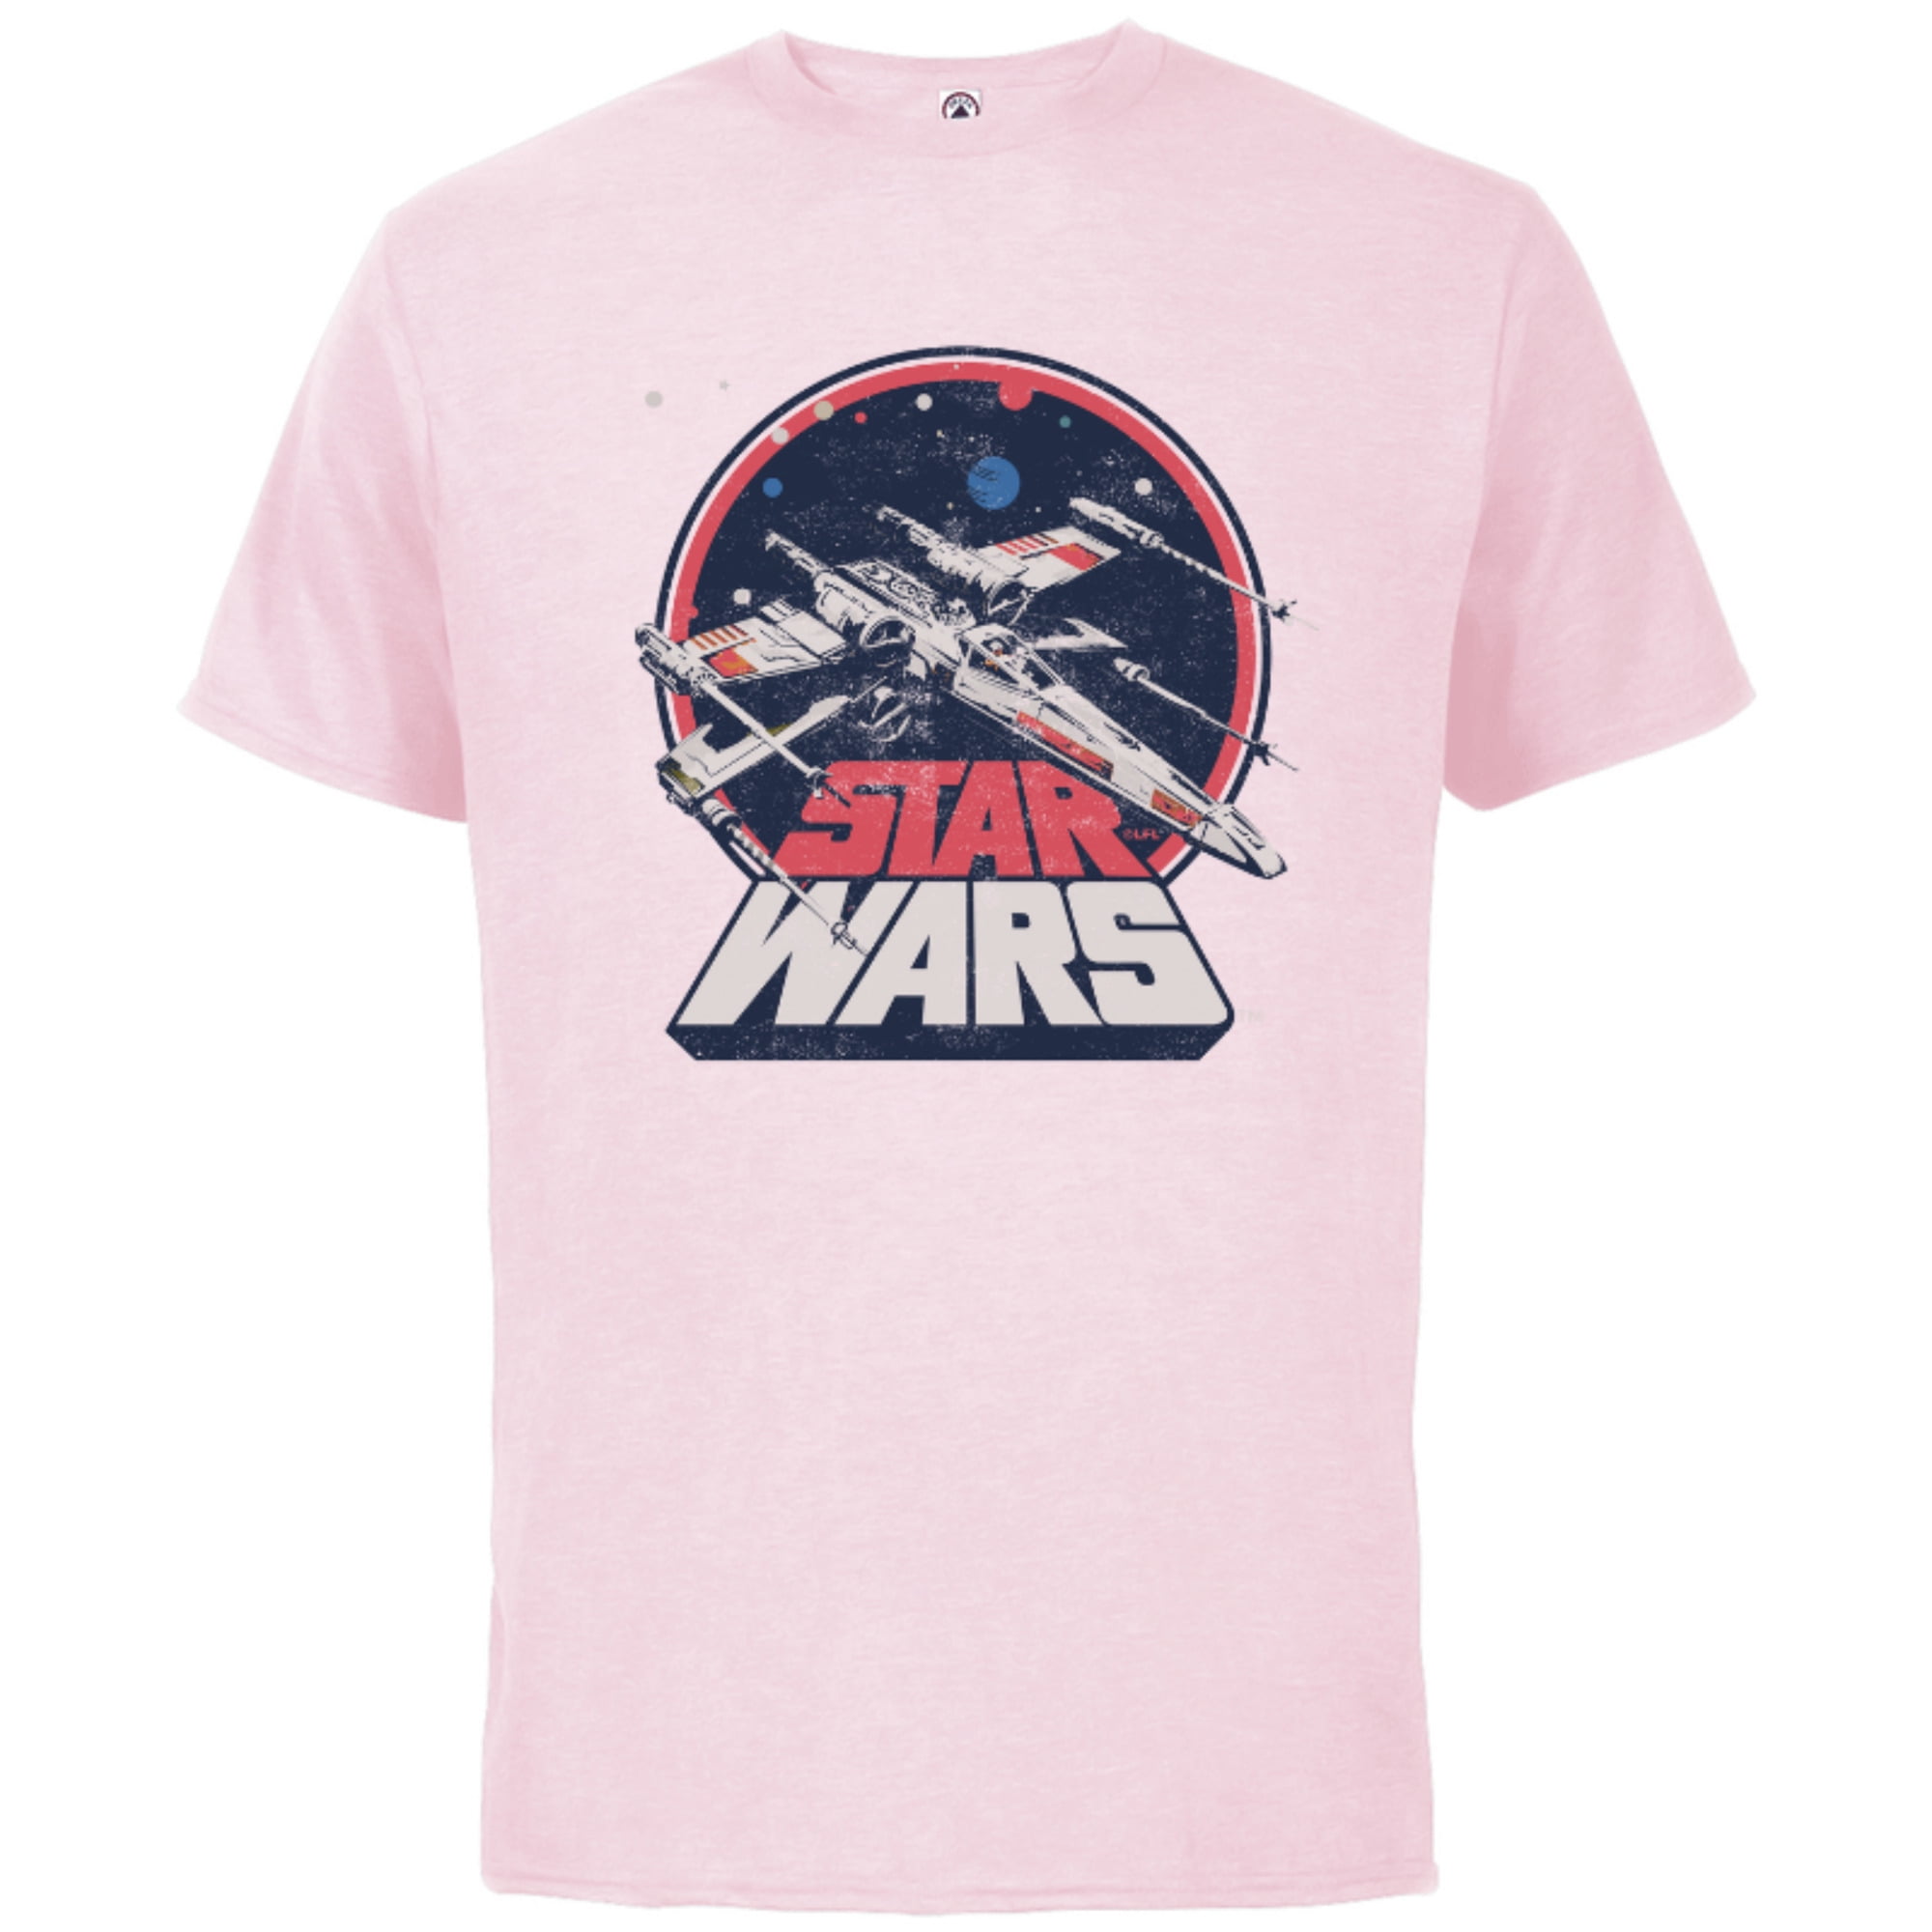 Star Wars X-Wing Starfighter Vintage - Short Sleeve Cotton T-Shirt for Adults - Pink - Walmart.com